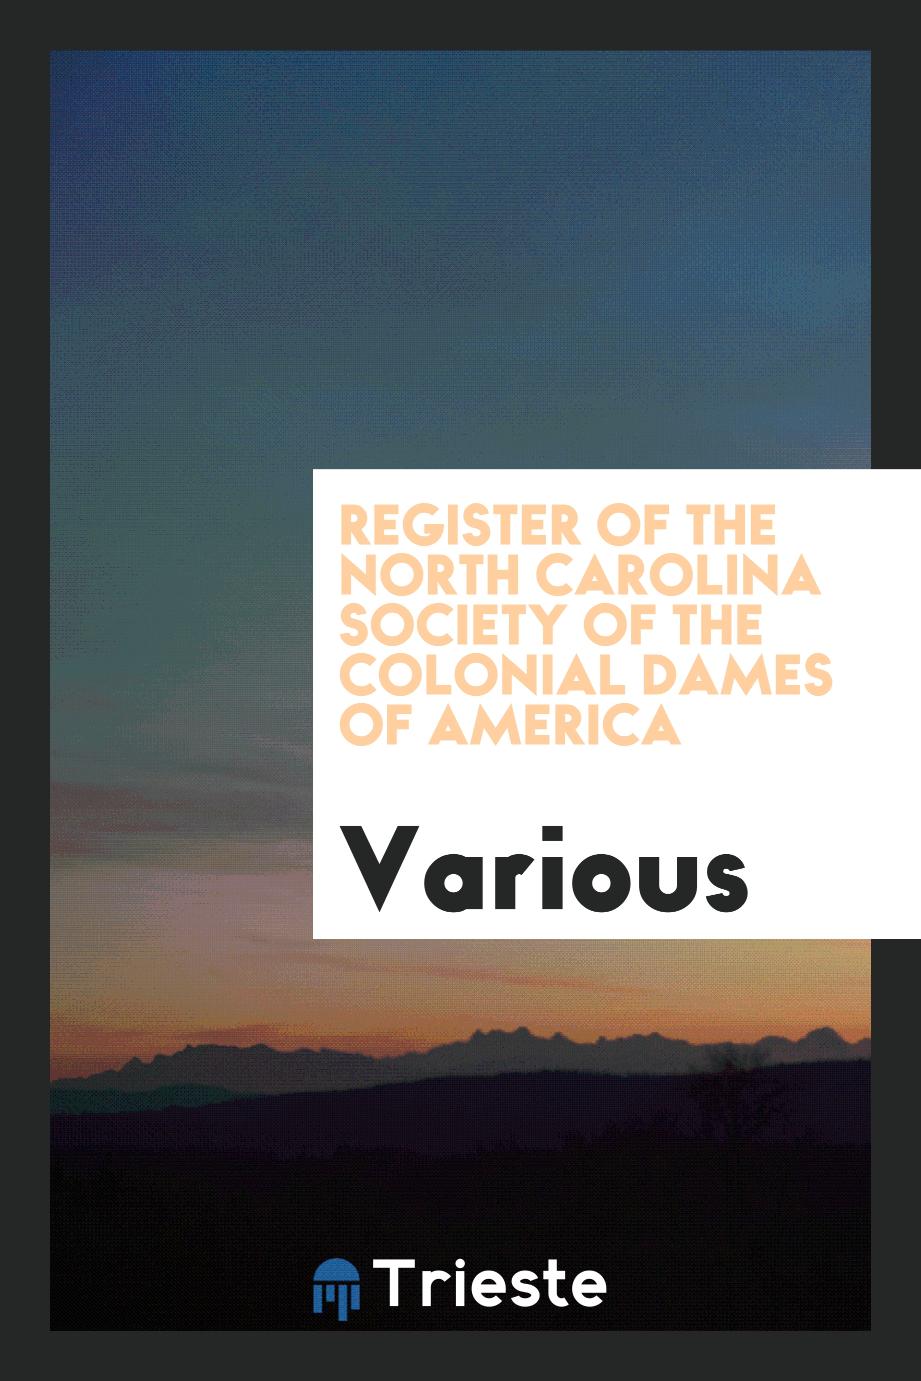 Register of the North Carolina Society of the Colonial Dames of America